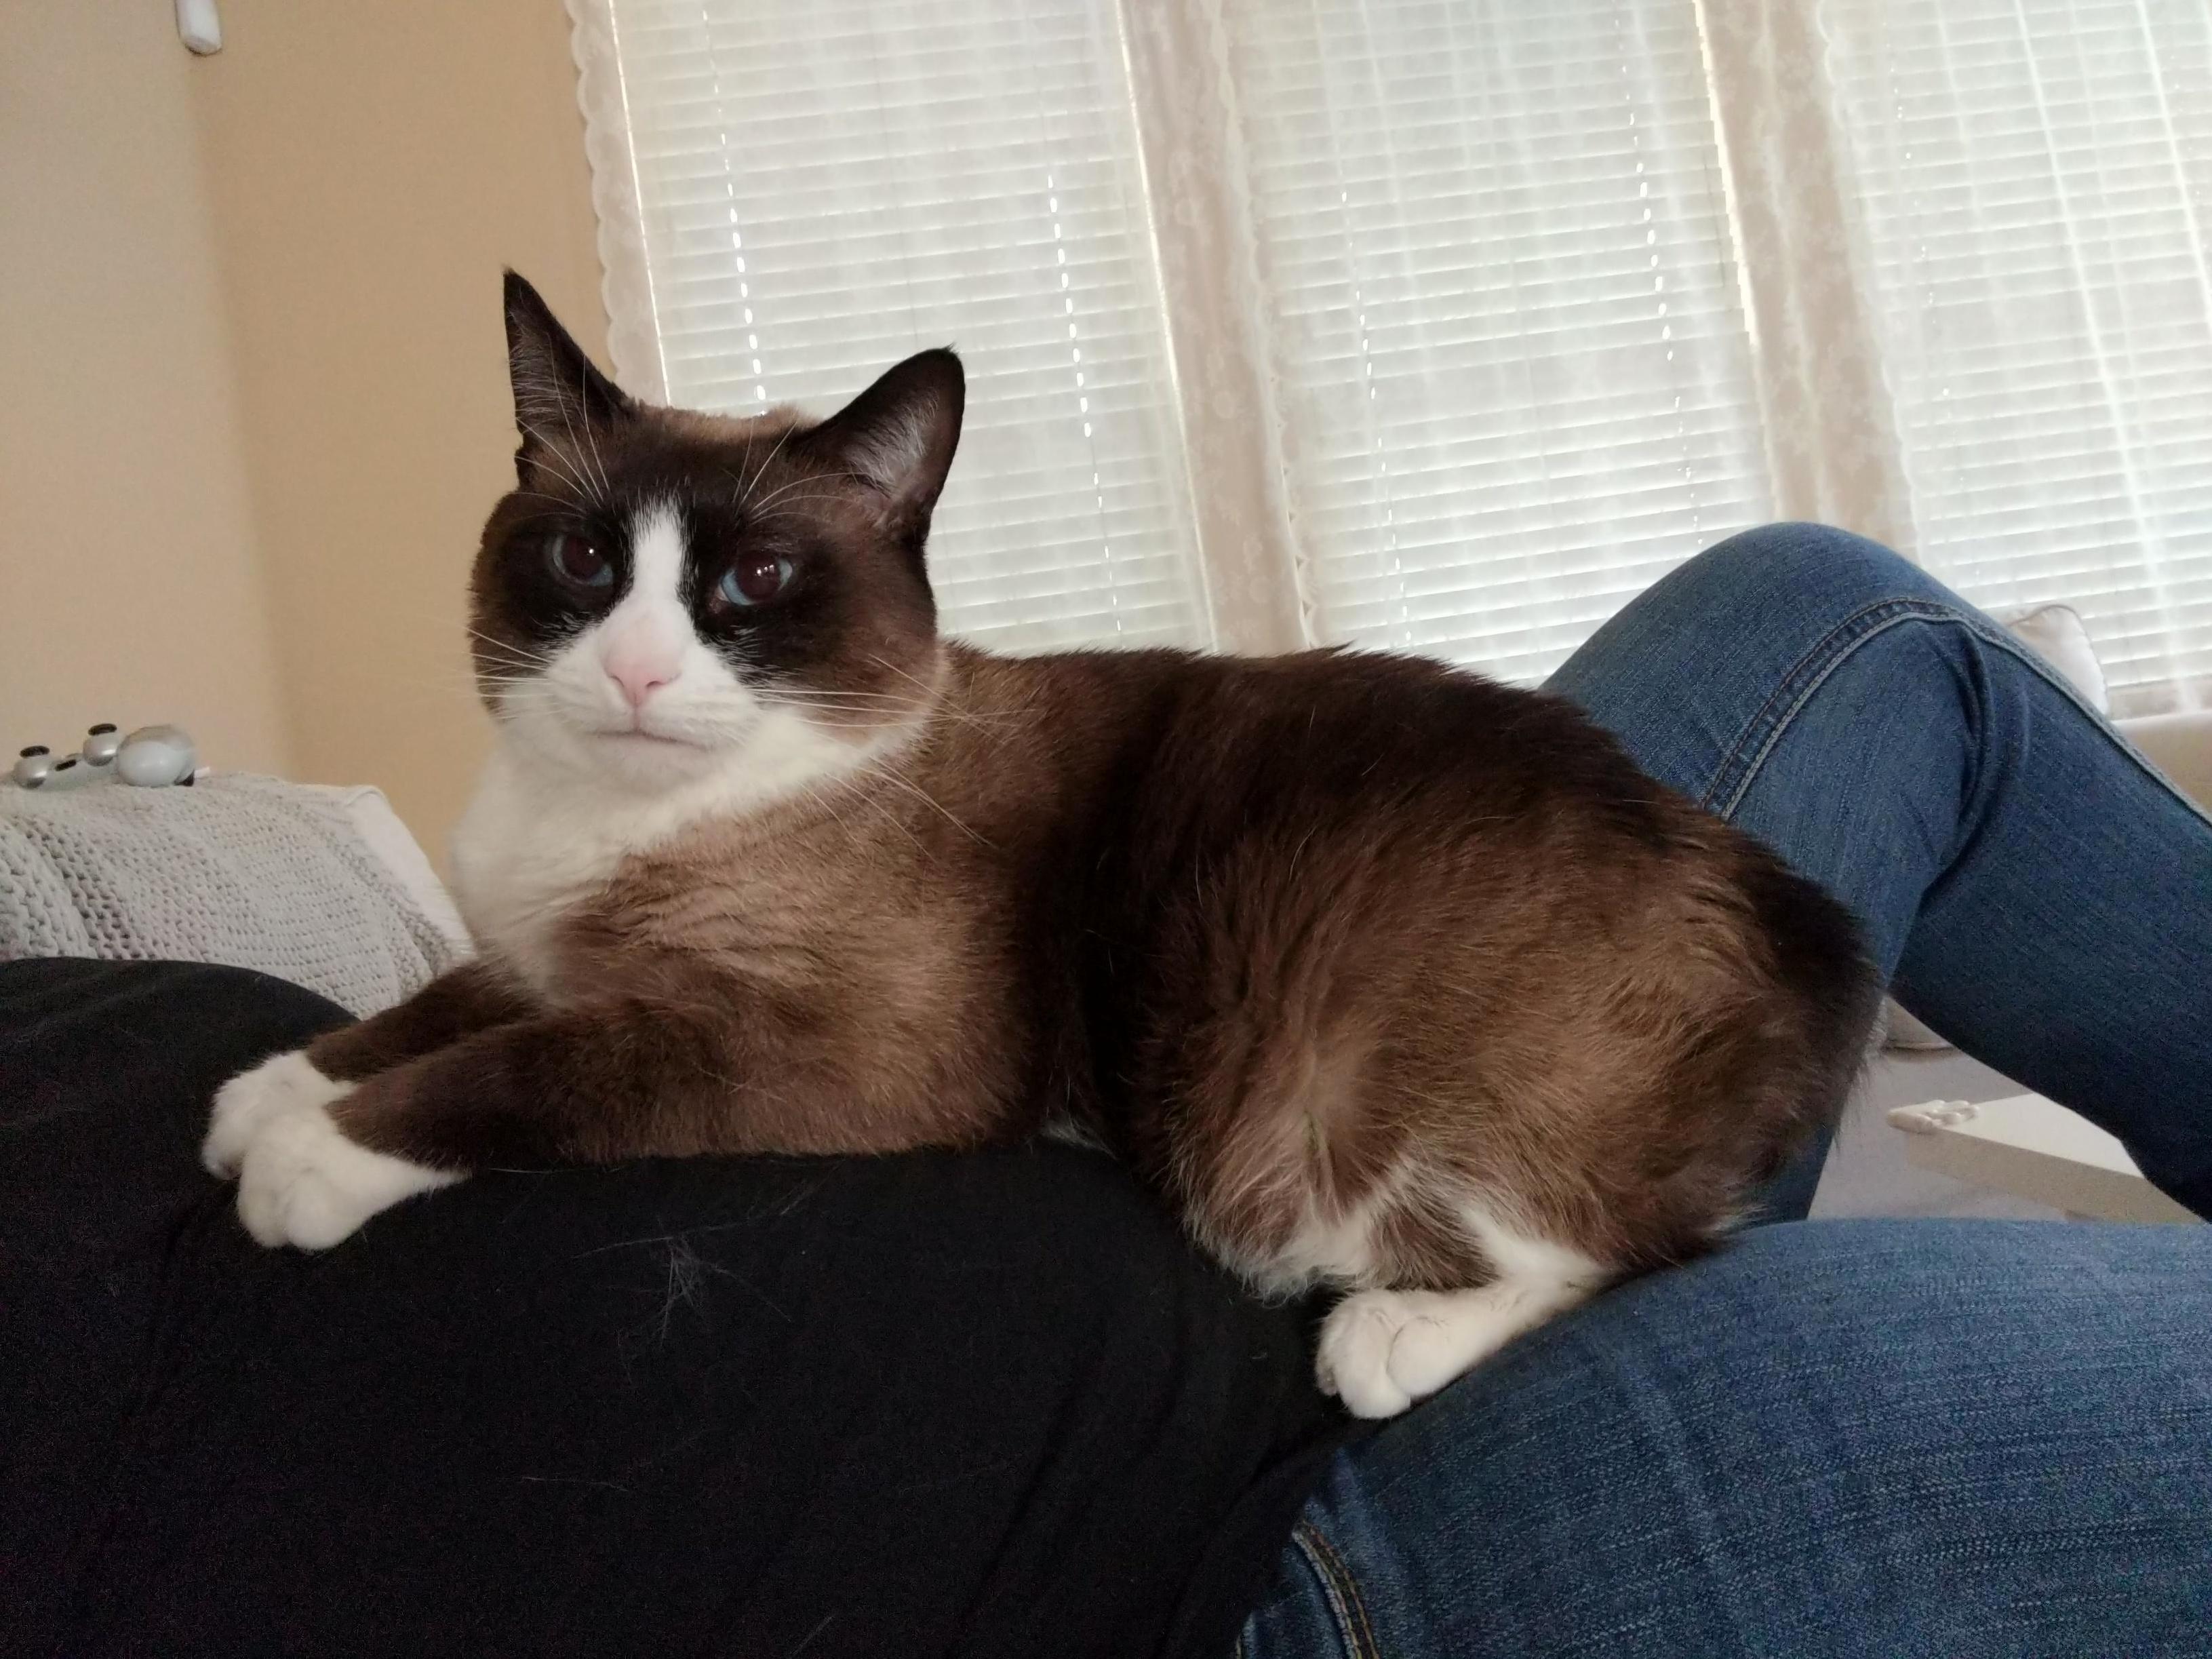 Moose must always have attention. manx snowshoe breeds are snuggley.